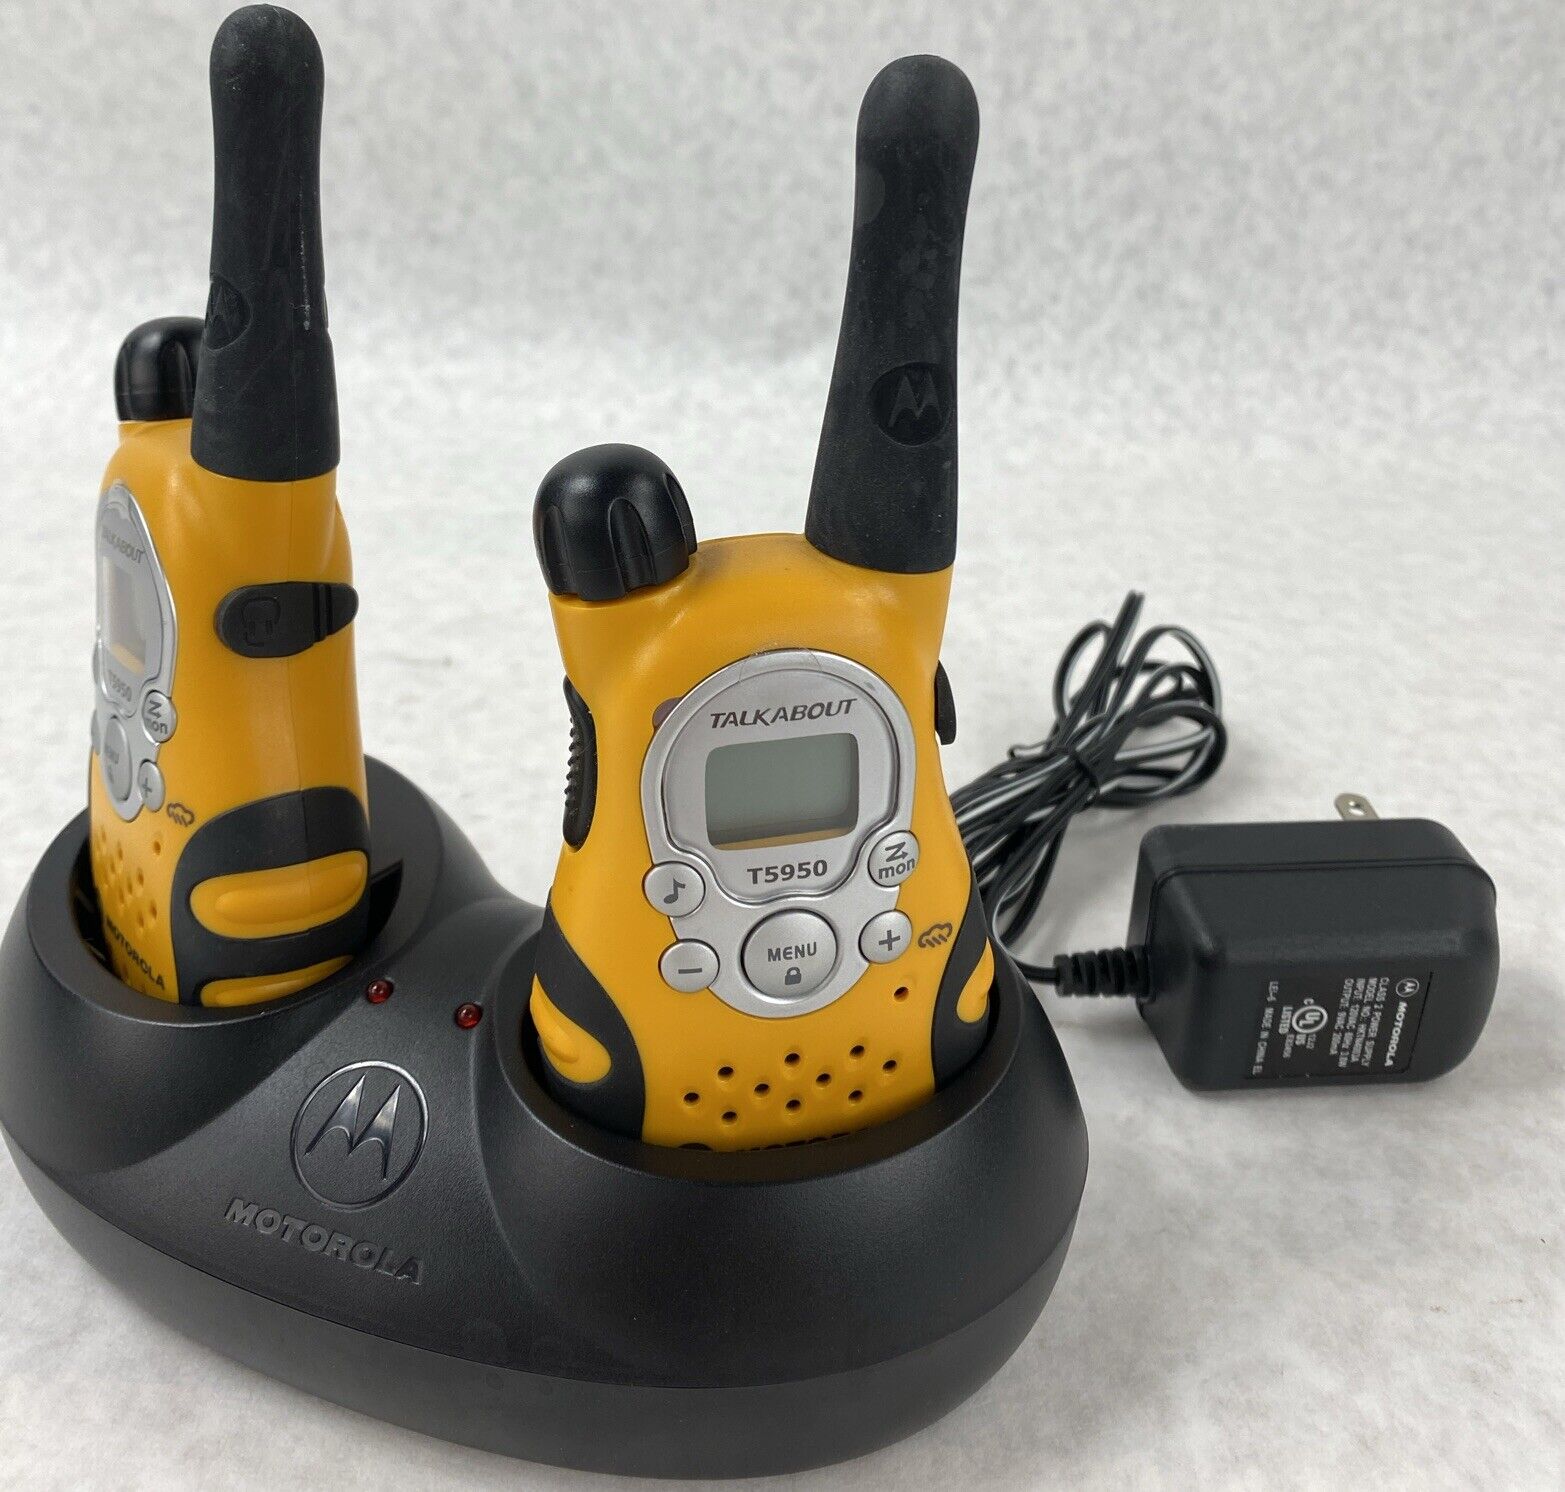 Motorola Talkabout T5950 Two-Way Radios Walkie Talkies with Charger NO BATTERIES